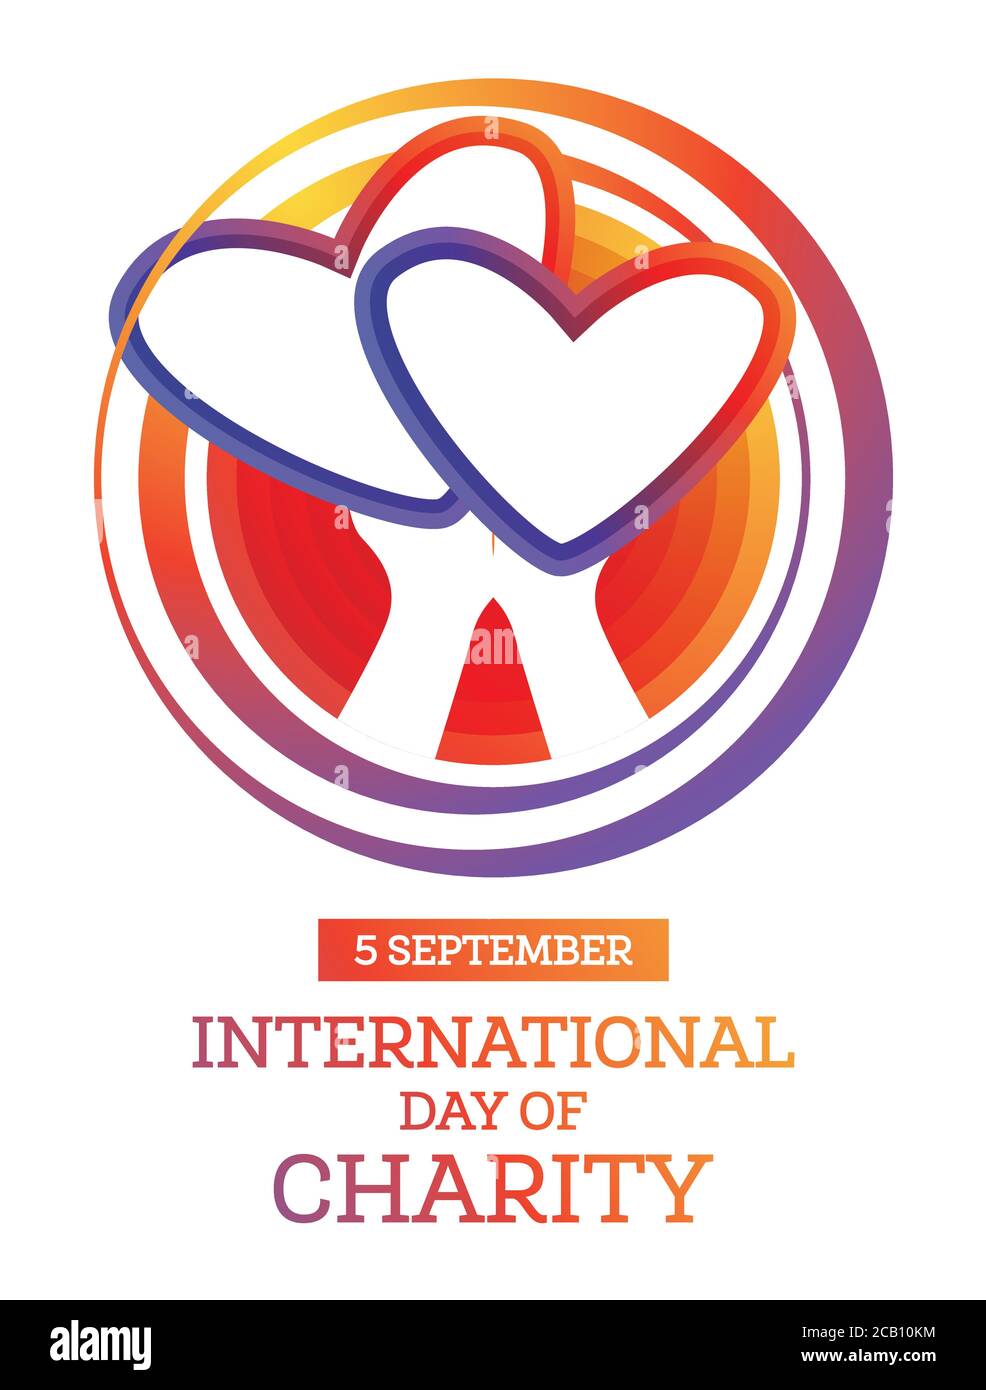 International Day of Charity. Observed Annually on 5 September. Hands Hold Two Hearts. Vector Illustration. Stock Vector